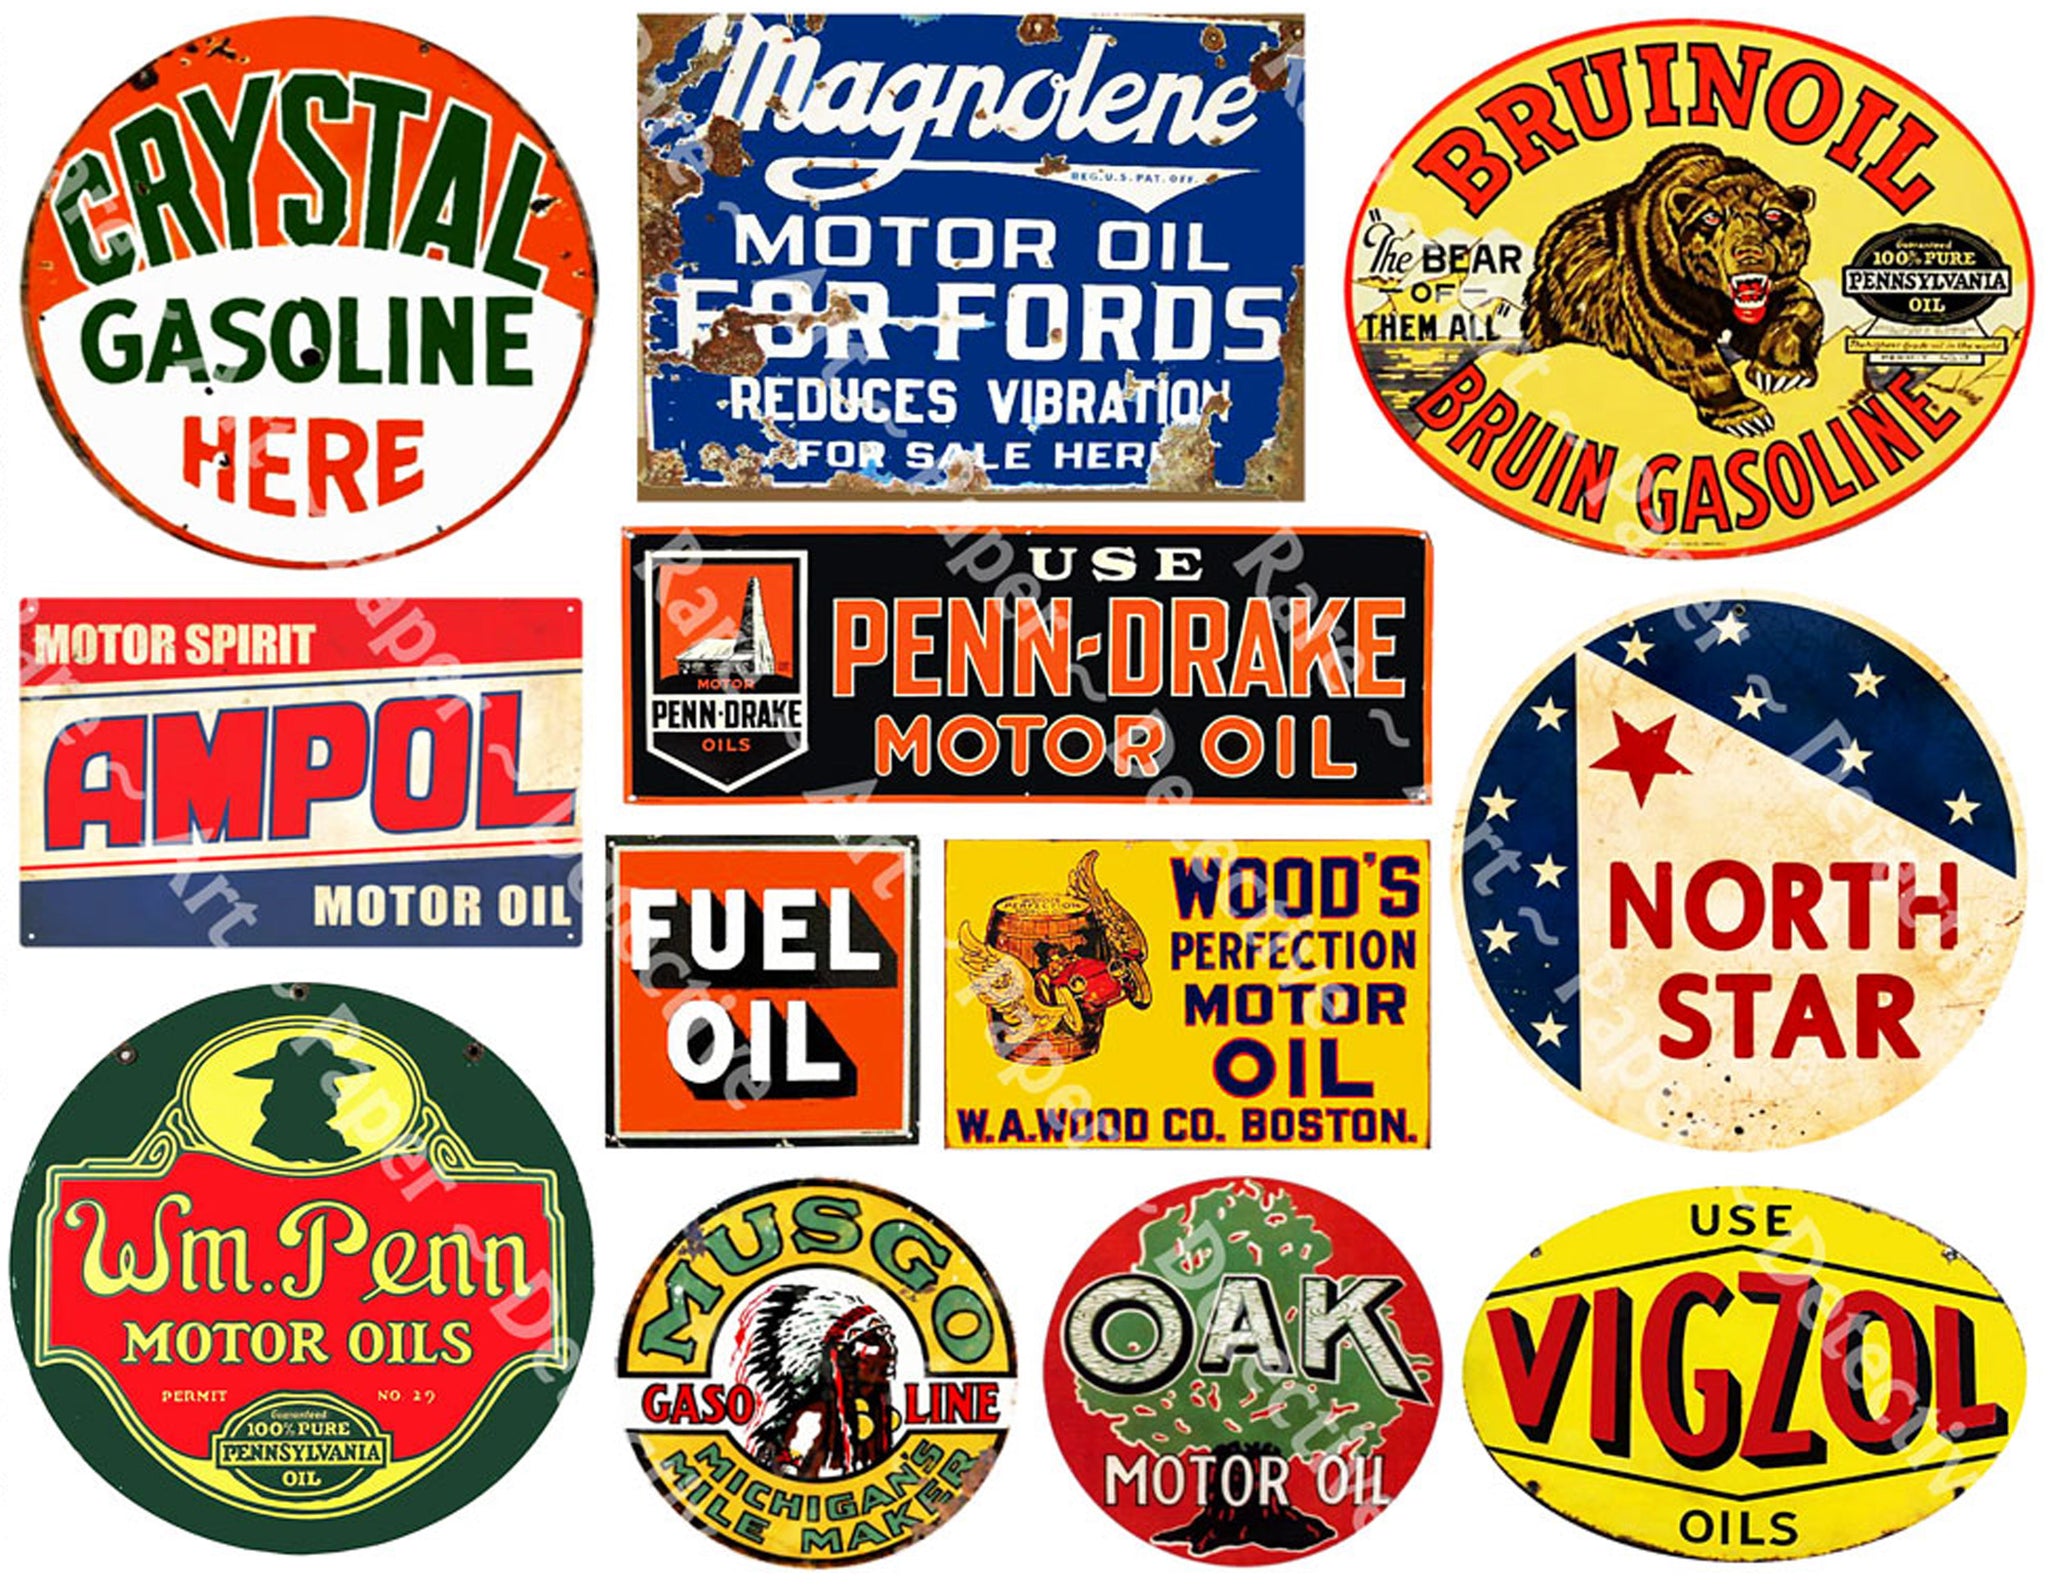 Oil Label Stickers, Garage Signs, Gas Label Decals, Service Station Rusty Metal Sign Illustrations, 8.5" x 11" Sheet, #494